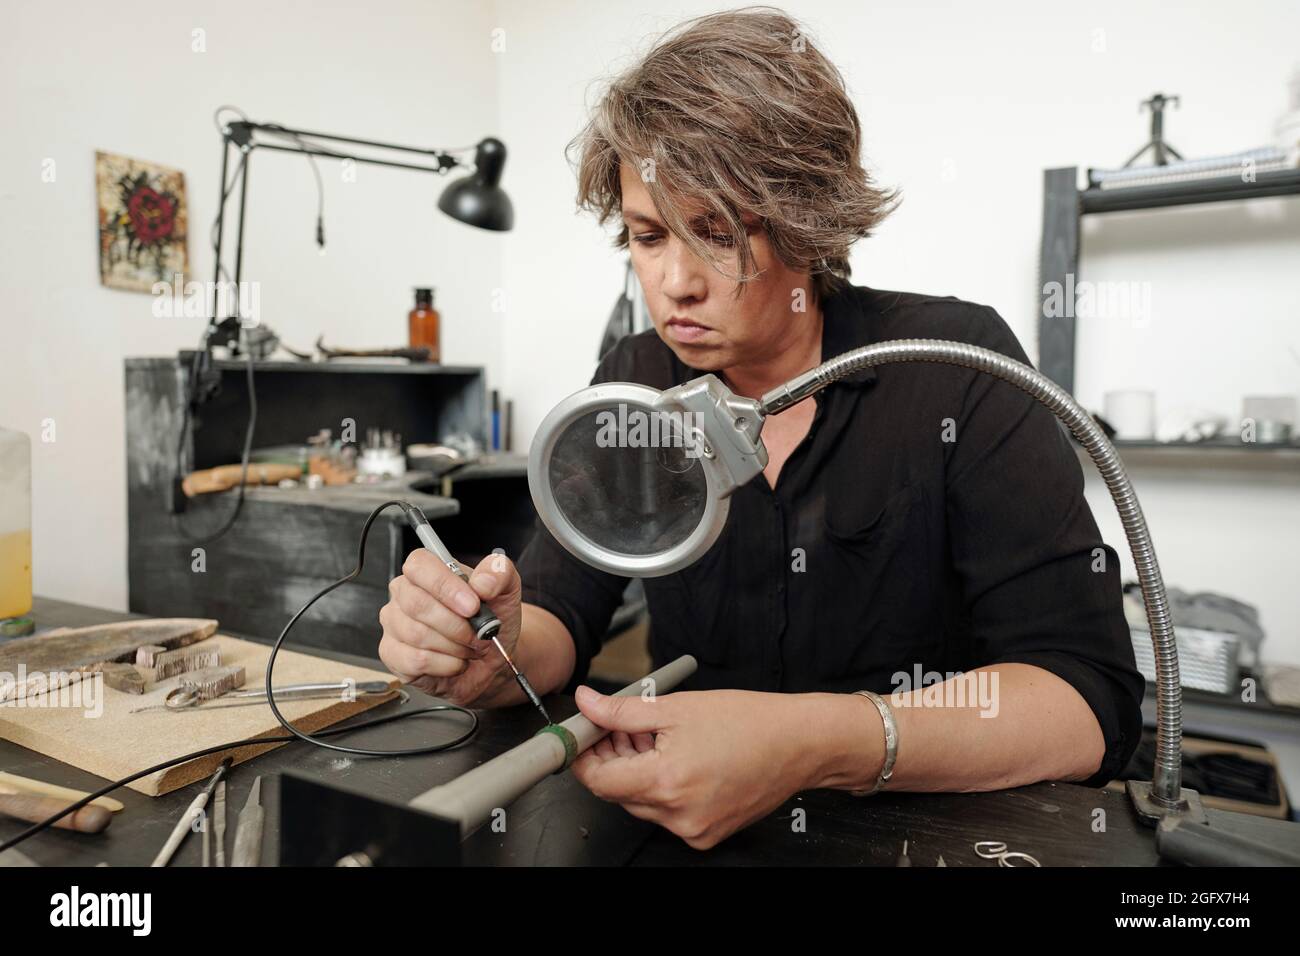 Concentrated female jeweler sitting in workshop with black furniture and soldering pieces of jewelry together under magnifying glass Stock Photo